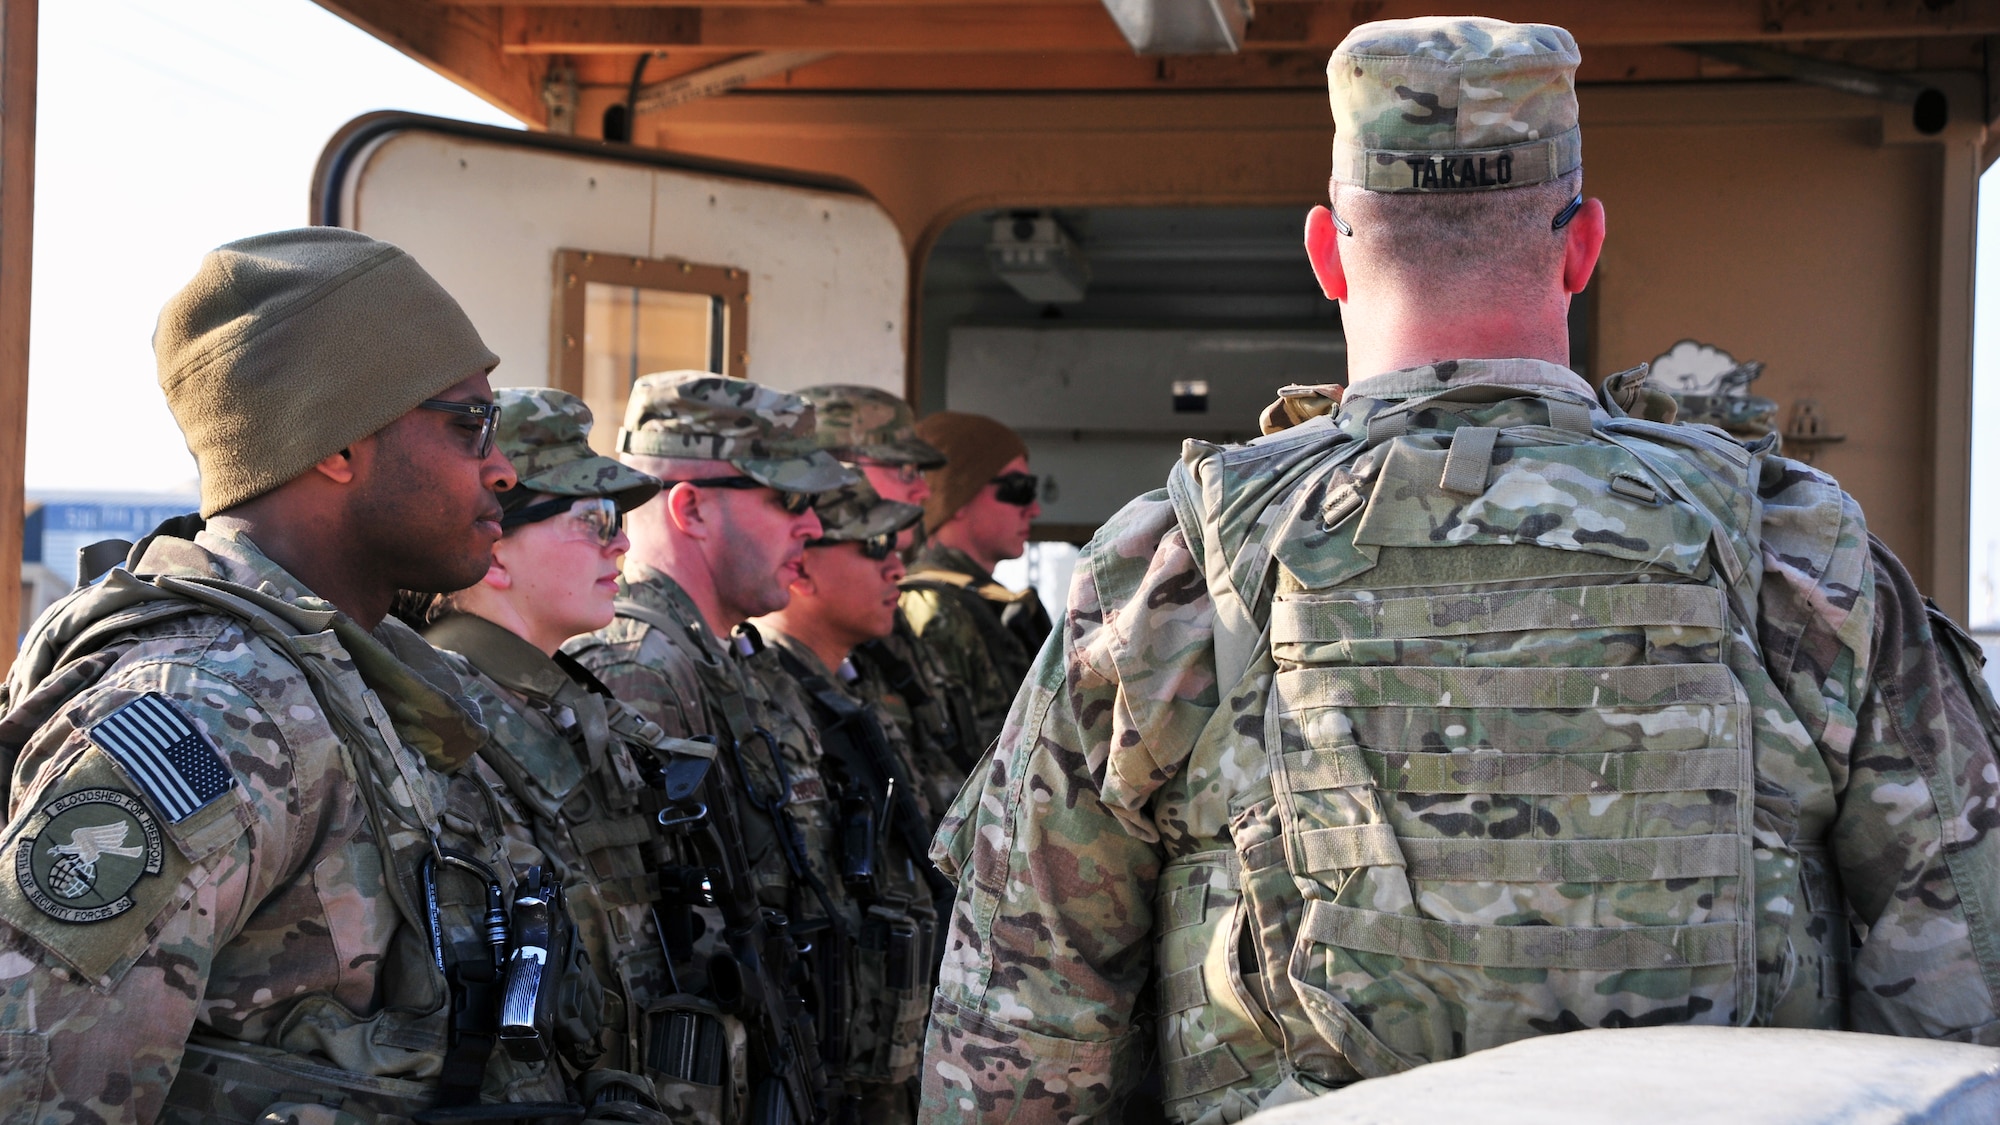 U.S. Air Force Airmen and U.S. Army soldiers prepare to meet U.S. Army Command Sgt. Maj. Christopher Gilpin, Combined Joint Task Force 3 United States Forces Afghanistan, during a tour Jan. 6, 2015 at Bagram Airfield, Afghanistan. During the tour, Gilpin had the opportunity to meet with 455th Air Expeditionary Wing leadership and become better acquainted with Air Force assets and squadrons. (U.S. Air Force photo by Staff Sgt. Whitney Amstutz/released)